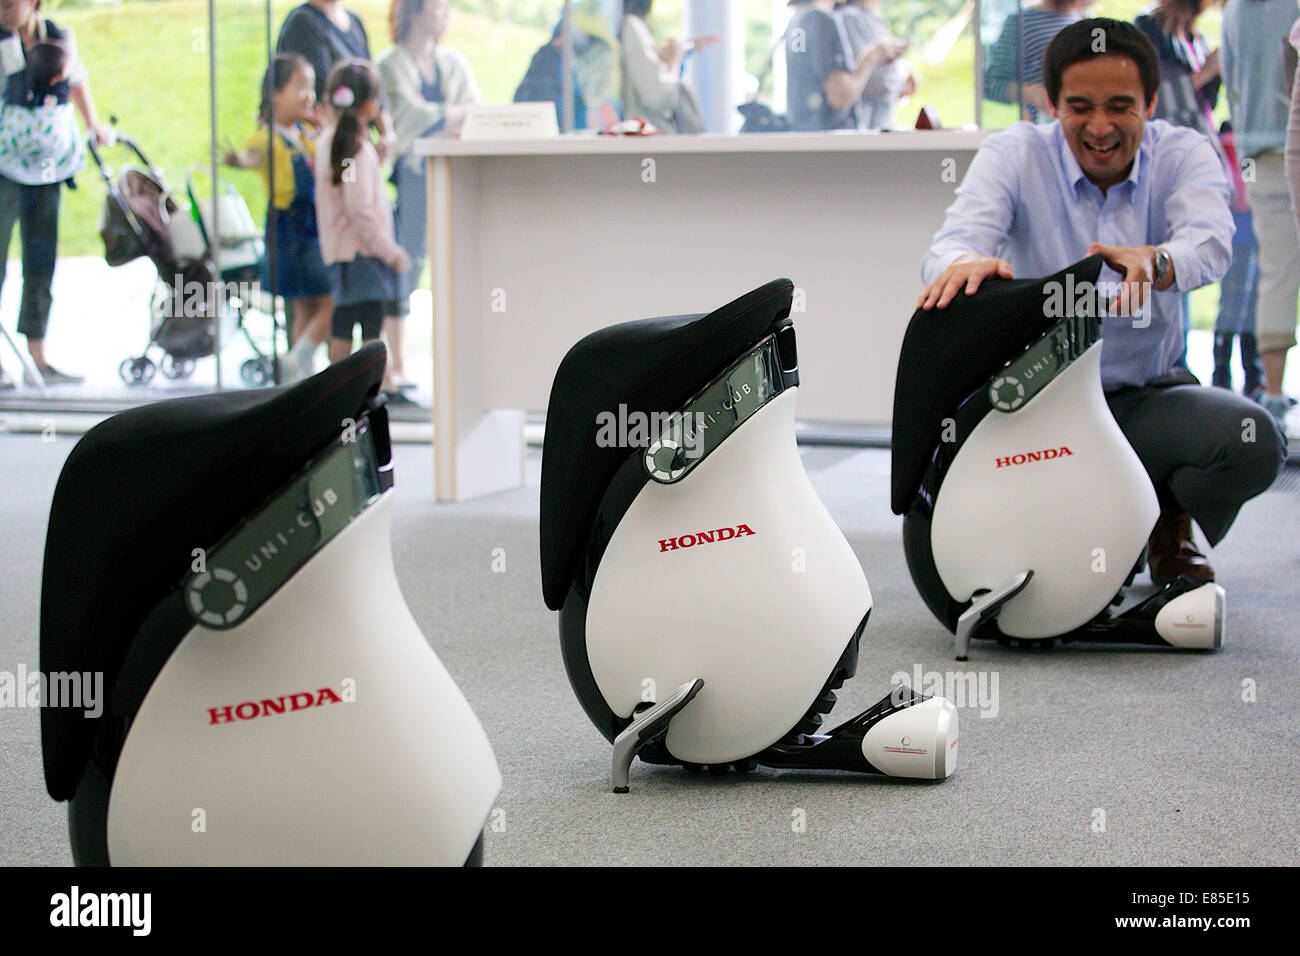 Tokyo, Japan. 1st October, 2014. An exhibitor shows how to ride the Honda's personal mobility device 'UNI-CUB B' at the National Museum of Emerging Science and Innovation (Miraikan) on October 1, 2014 in Tokyo, Japan. For the first time visitors can drive the Honda's personal mobility inside the Miraikan building, the rental cost is 620 JPY (5.66 USD) for adults and 210 JPY (1.92USD) for under 18 years from October 1 to March 31, 2015. According to the Honda staff UNI-CUB B can be used inside the buildings such as museums, airports, universities and other business places. © Rodrigo Reyes Marin Stock Photo